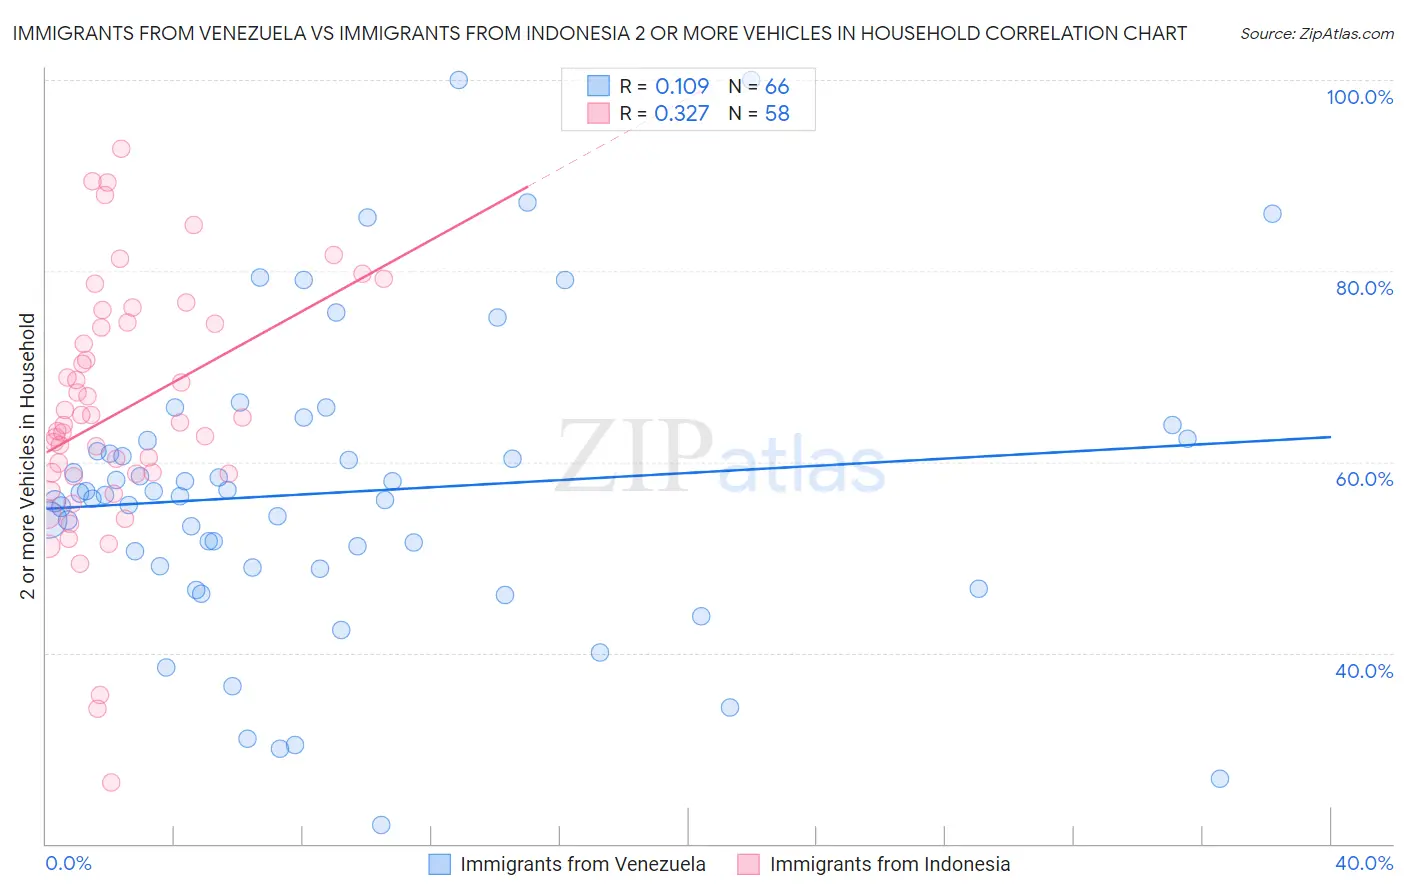 Immigrants from Venezuela vs Immigrants from Indonesia 2 or more Vehicles in Household